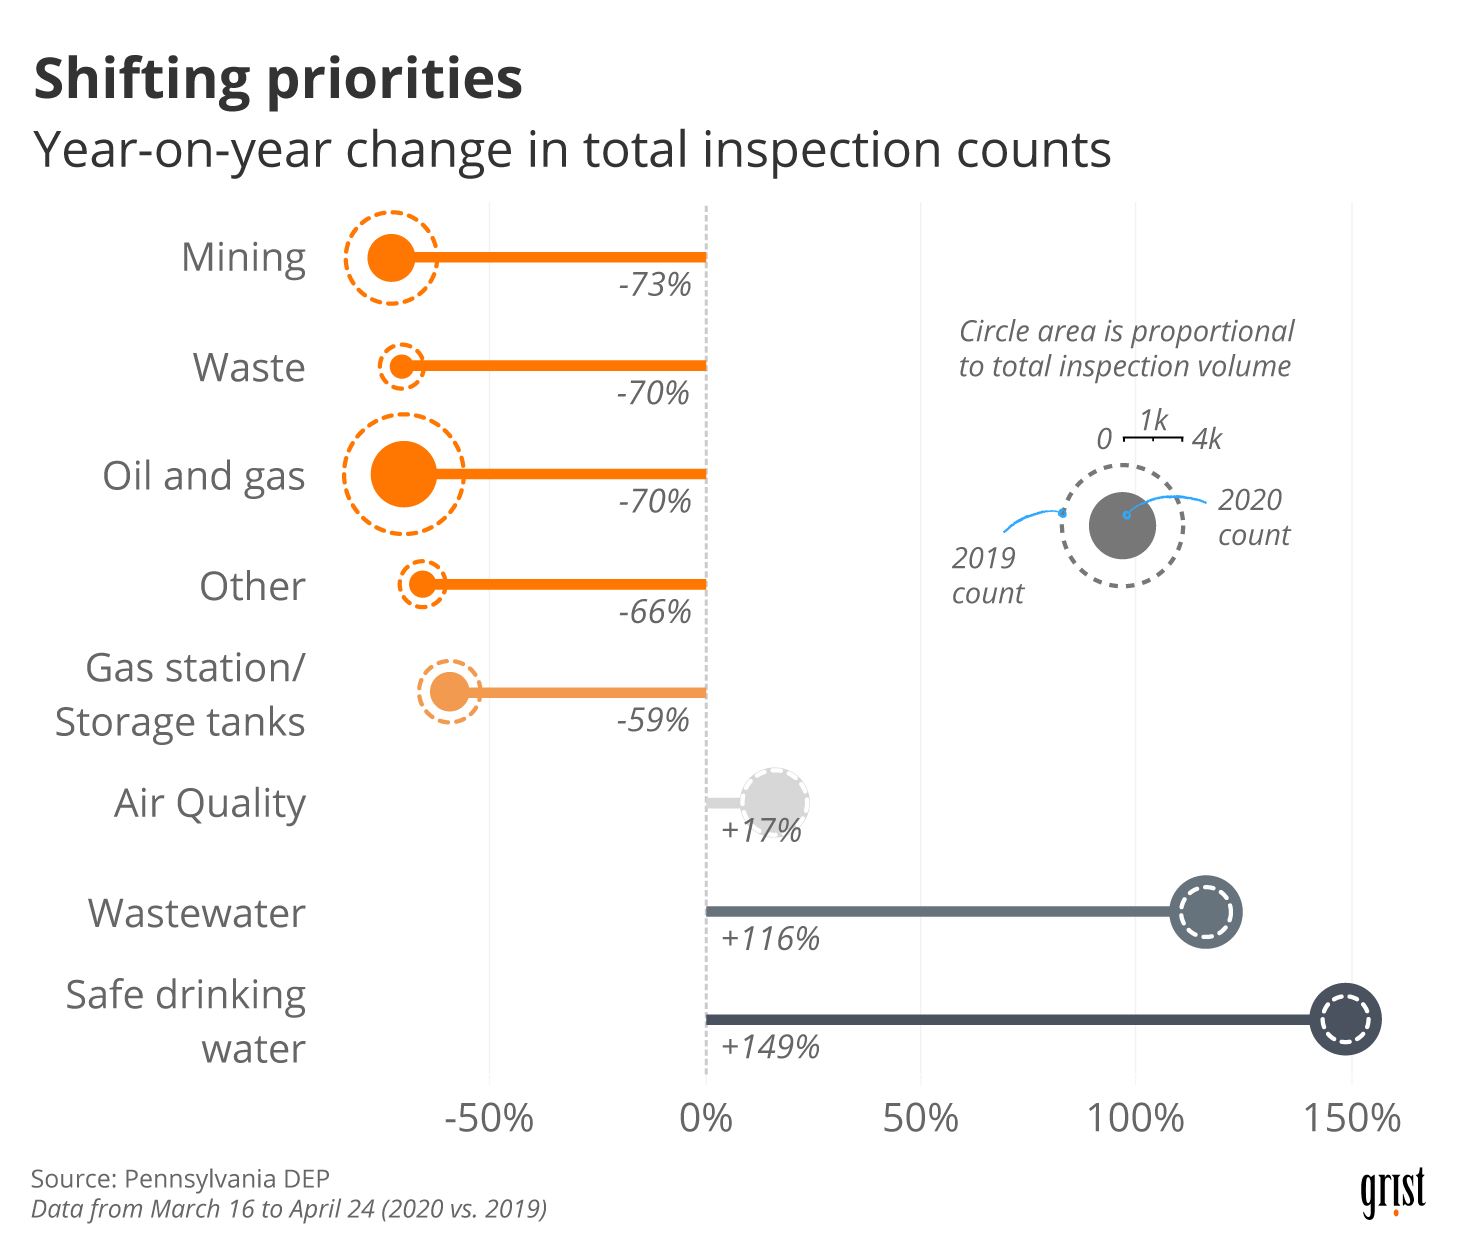 A chart comparing environmental inspections by the Pennsylvania DEP in 2019 and 2020 by inspection type. In March/April 2020, oil and gas inspections fell by 70 percent relative to the previous year.